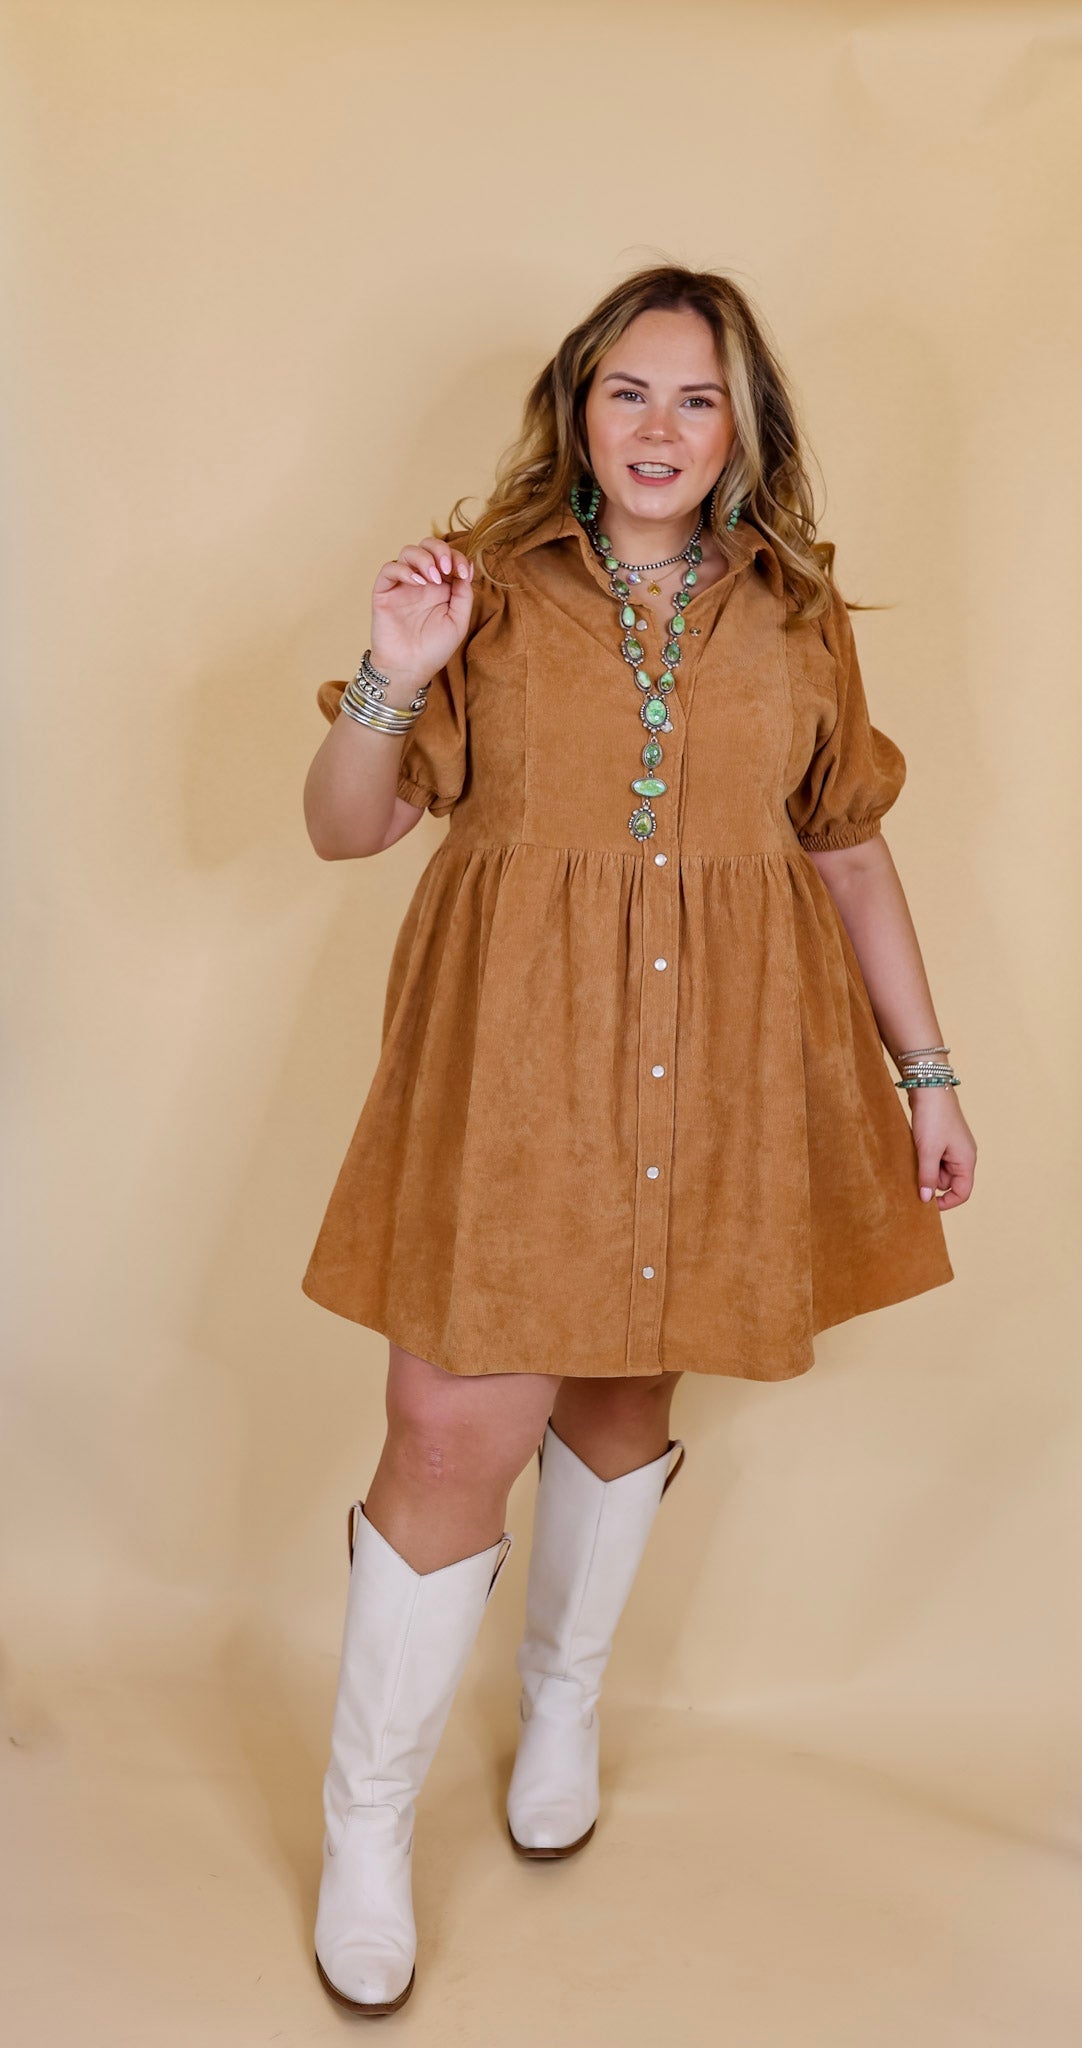 Adventures Ahead Button Up Corduroy Babydoll Dress in Camel Brown - Giddy Up Glamour Boutique